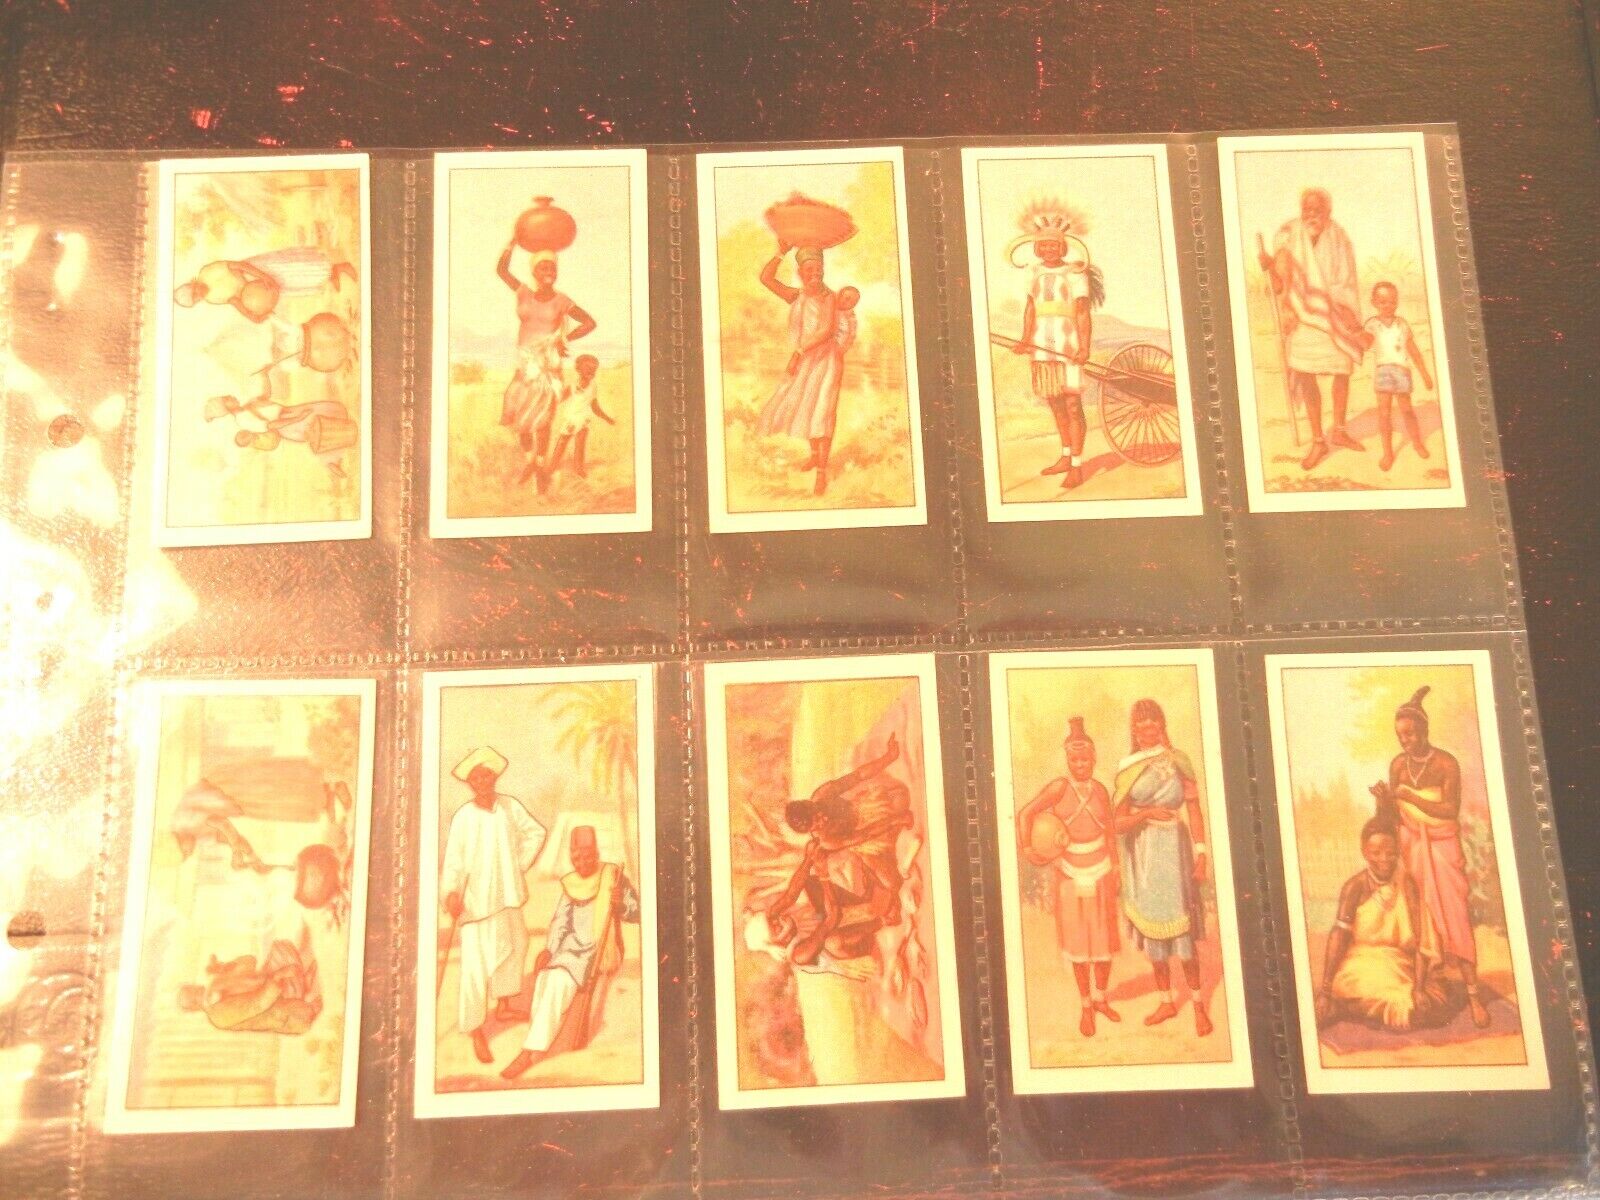 1936 CWS AFRICAN TYPES Zulu,Africa life complete set Tobacco Cigarette 24 cards